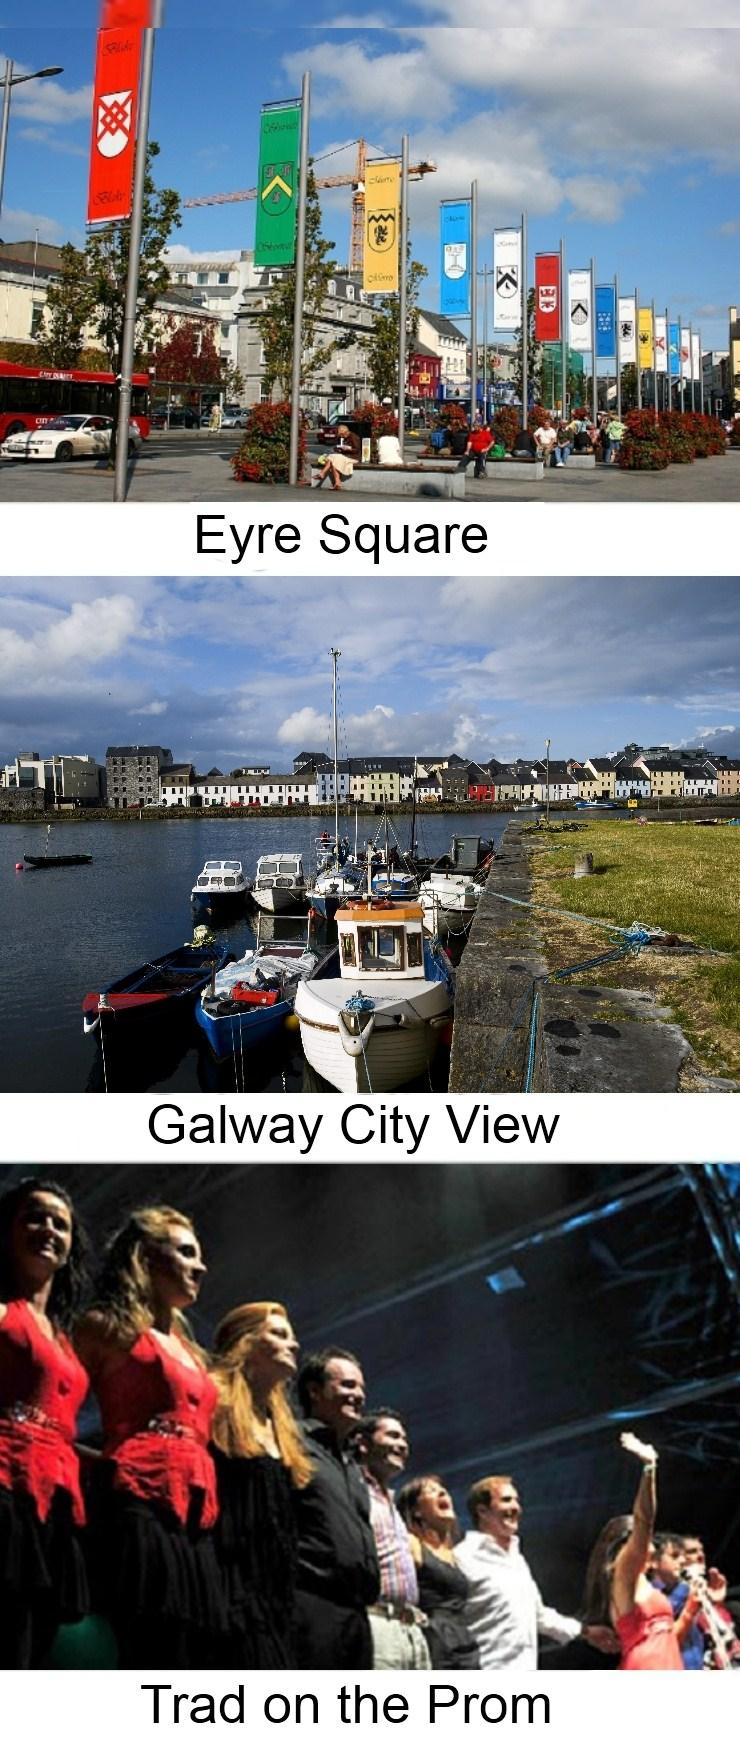 Day 6: Galway City Day six of your tour will give you the comfort and time to explore Galway City at your own pace.